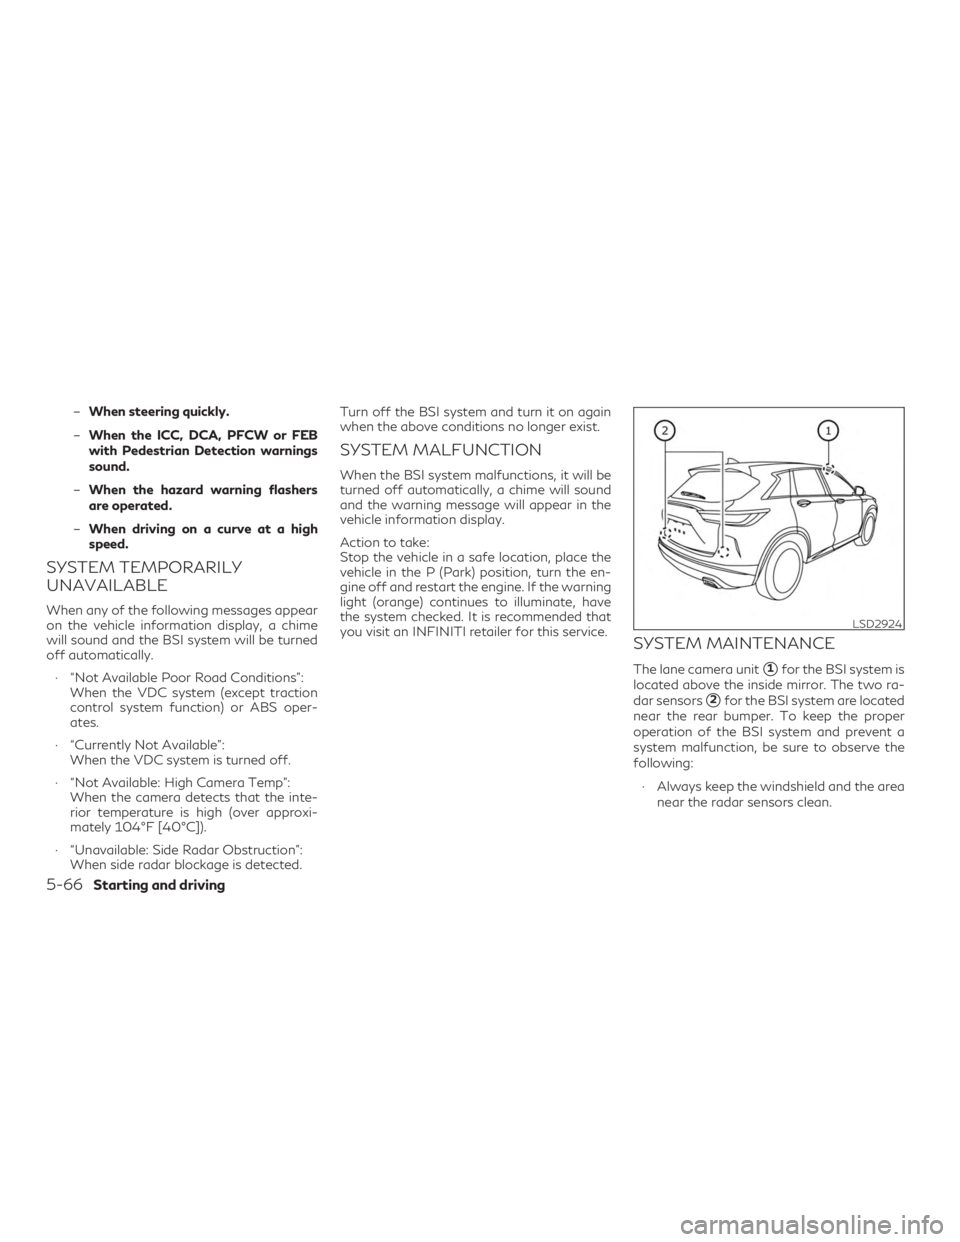 INFINITI QX50 2020 Service Manual –When steering quickly.
– When the ICC, DCA, PFCW or FEB
with Pedestrian Detection warnings
sound.
– When the hazard warning flashers
are operated.
– When driving on a curve at a high
speed.
S